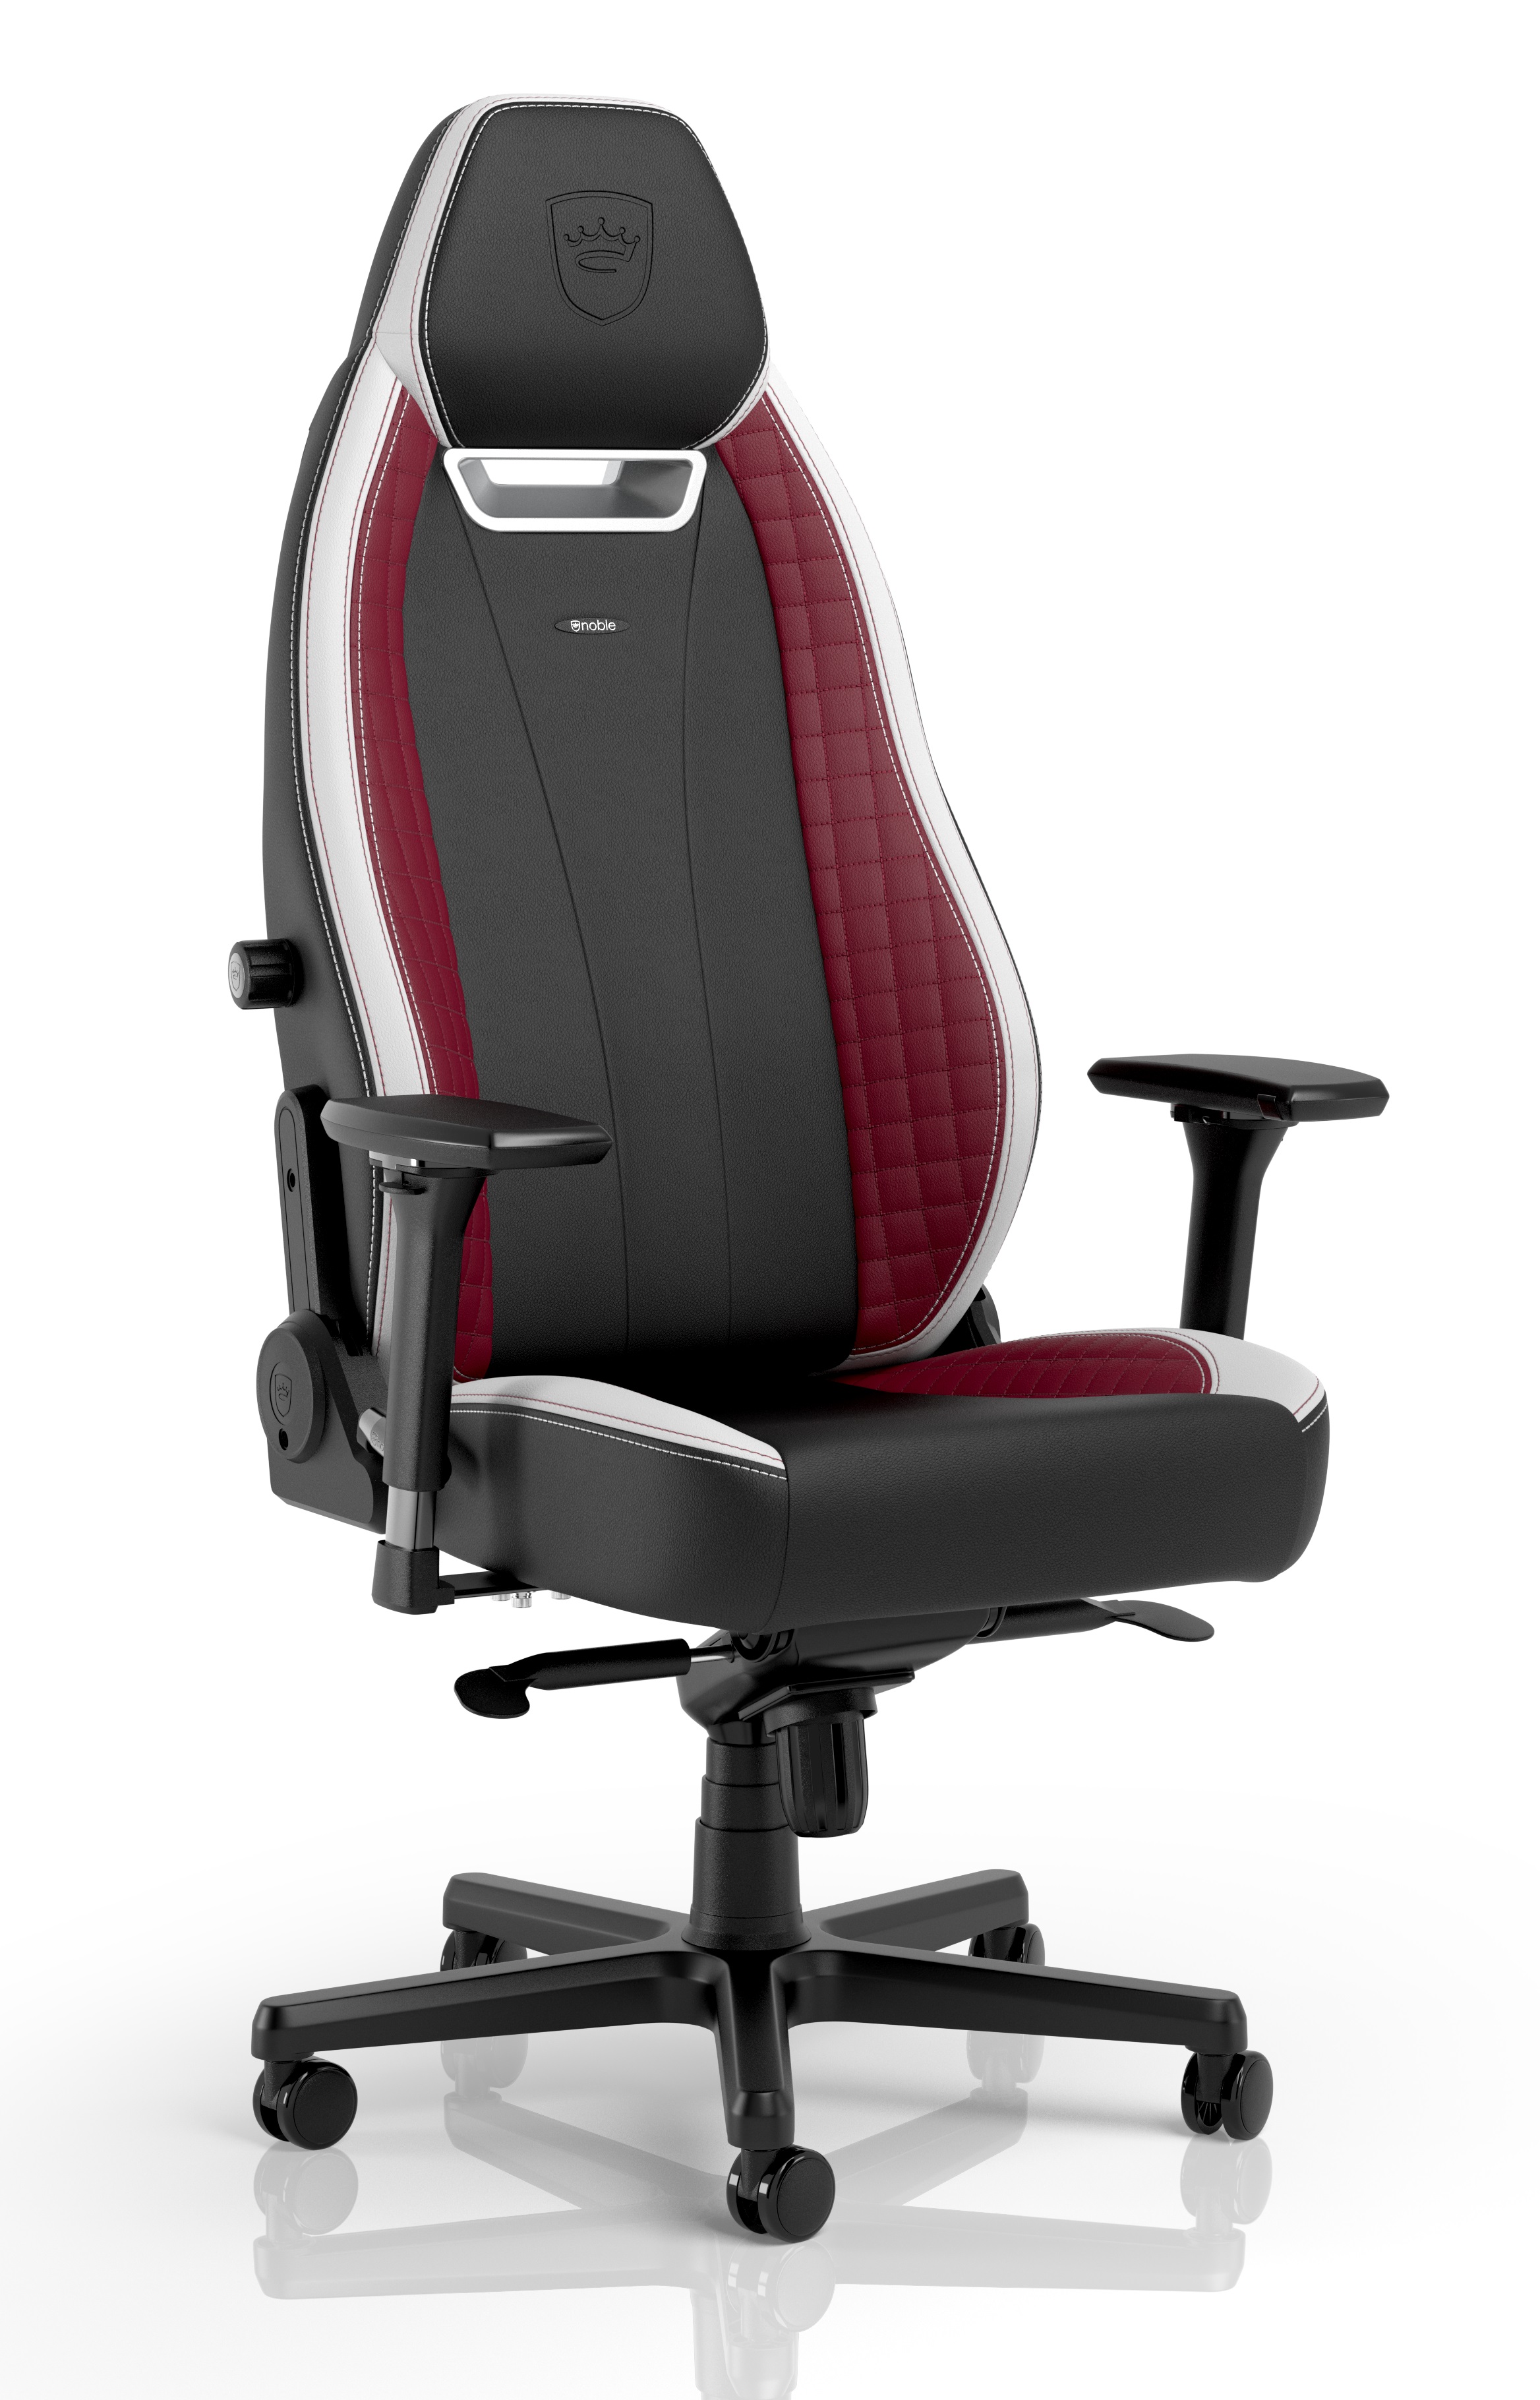 noblechairs - noblechairs LEGEND Gaming Chair Black/White/Red Edition